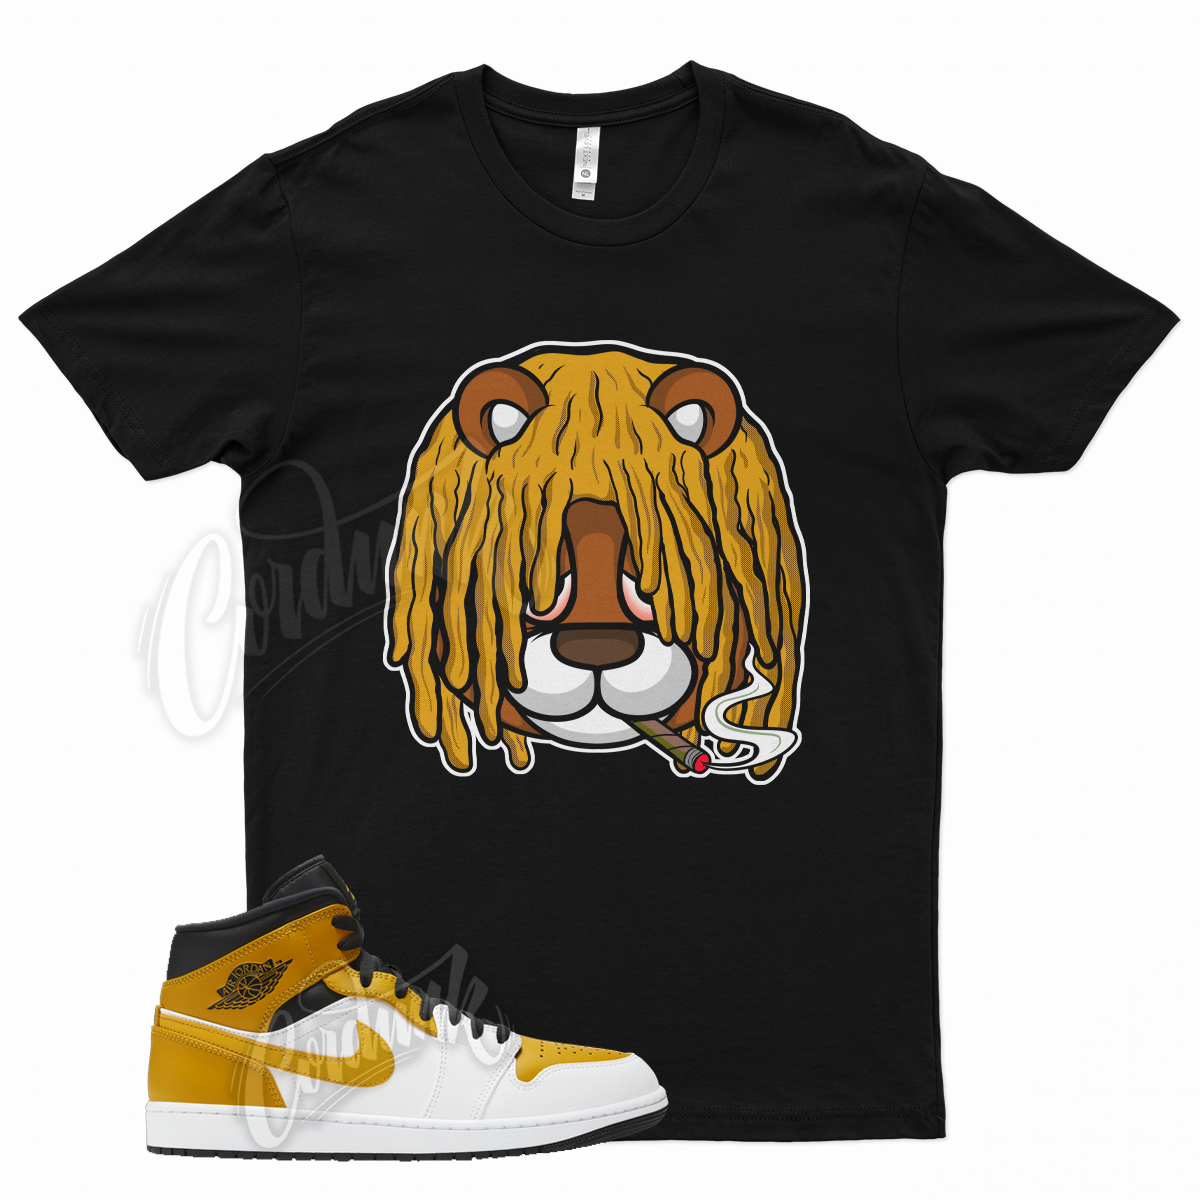 Primary image for Black DREAD T Shirt for Air J1 1 Mid University Gold White